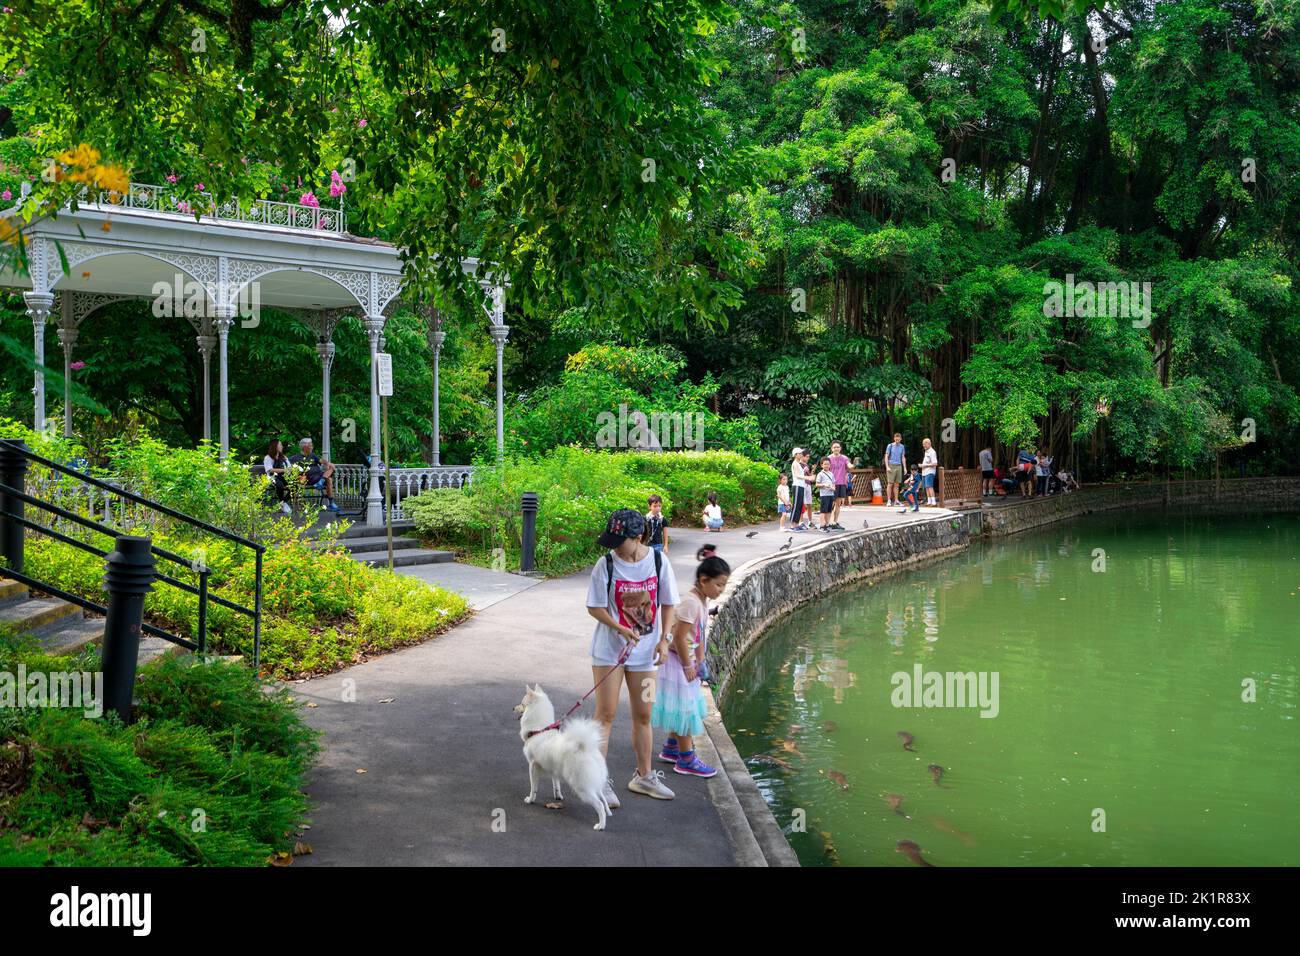 Visitors relaxing by pond in Singapore Botanic Gardens established in 1859 and covering 82 hectares. Stock Photo